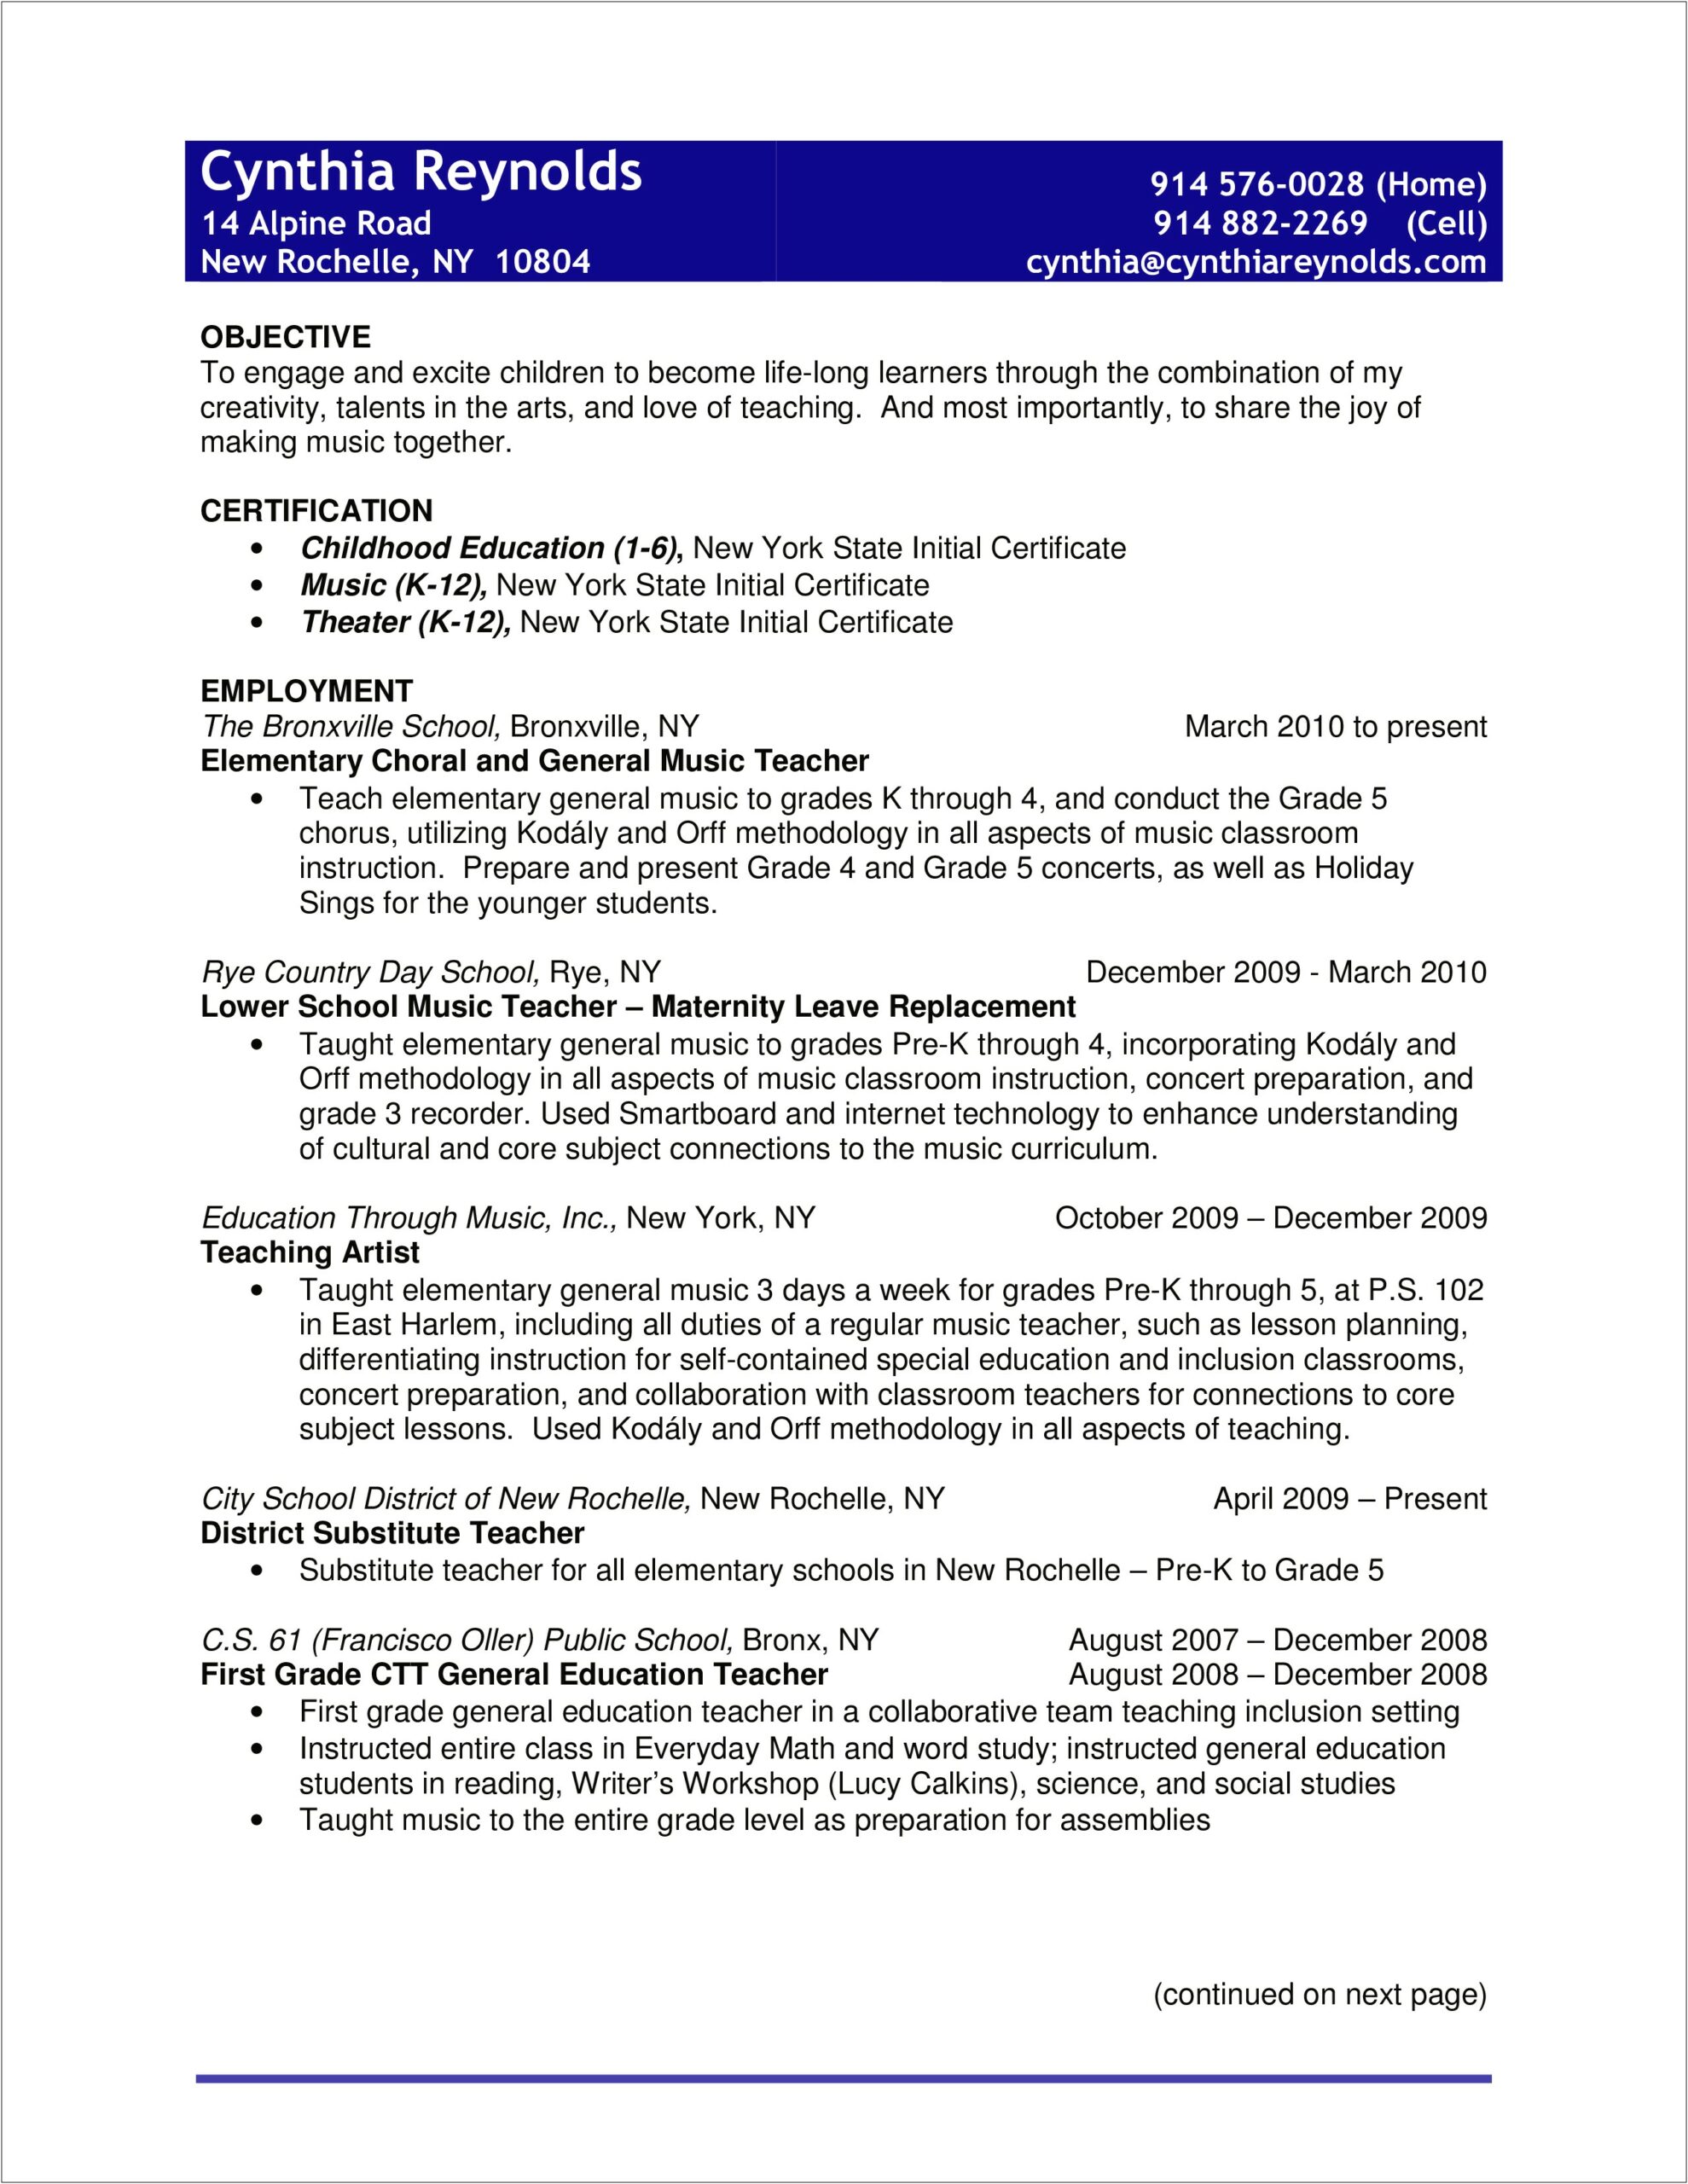 Resume Sample Continued From Previous Page